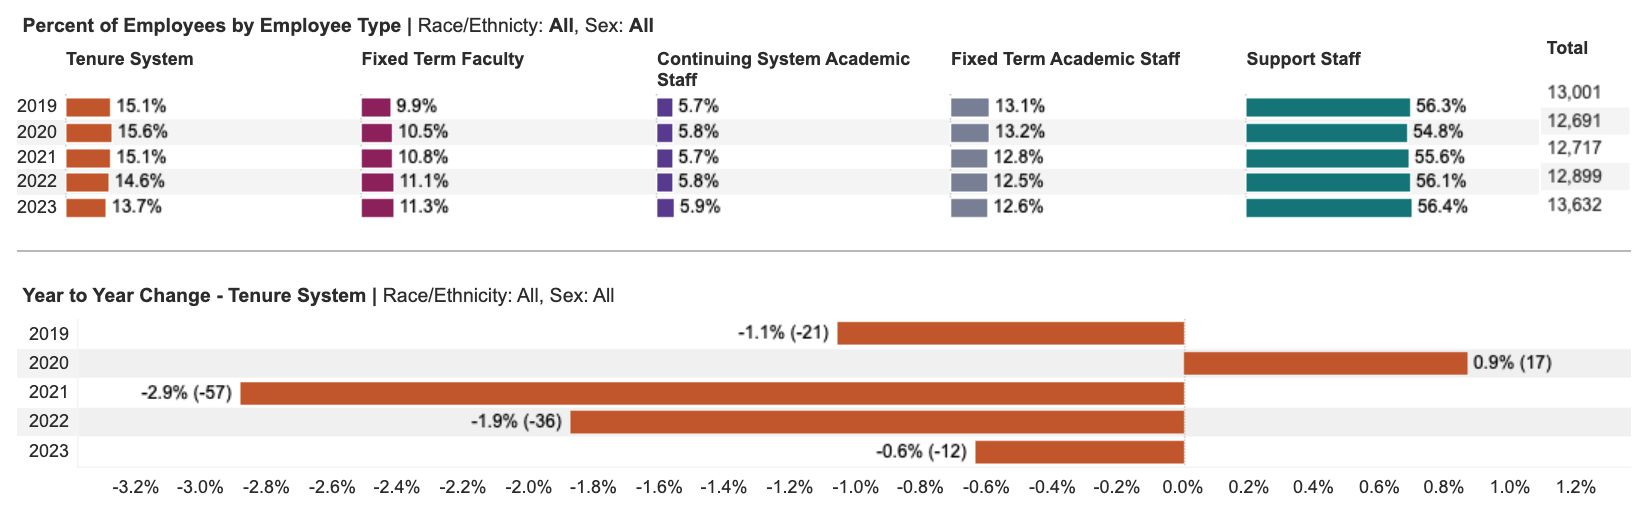 screen shot of employee chart by type, including tenure, fixed term faculty, academic staff, fixed term staff and support staff and features colorful bar charts